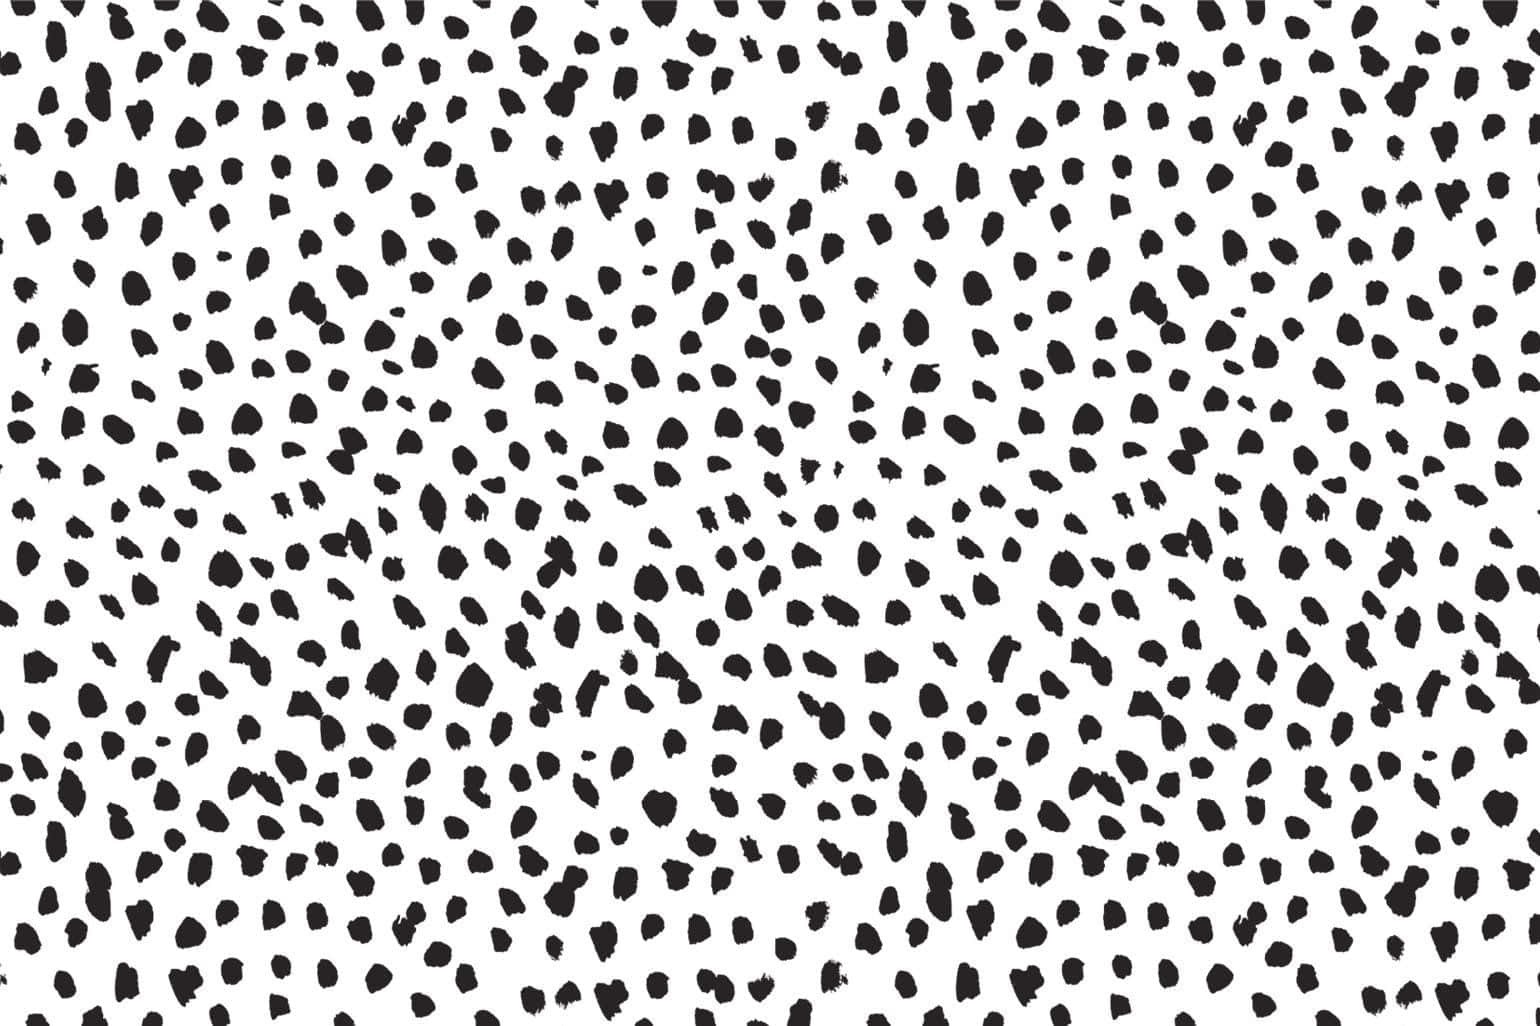 "A mysterious pattern of black dots against a white background" Wallpaper